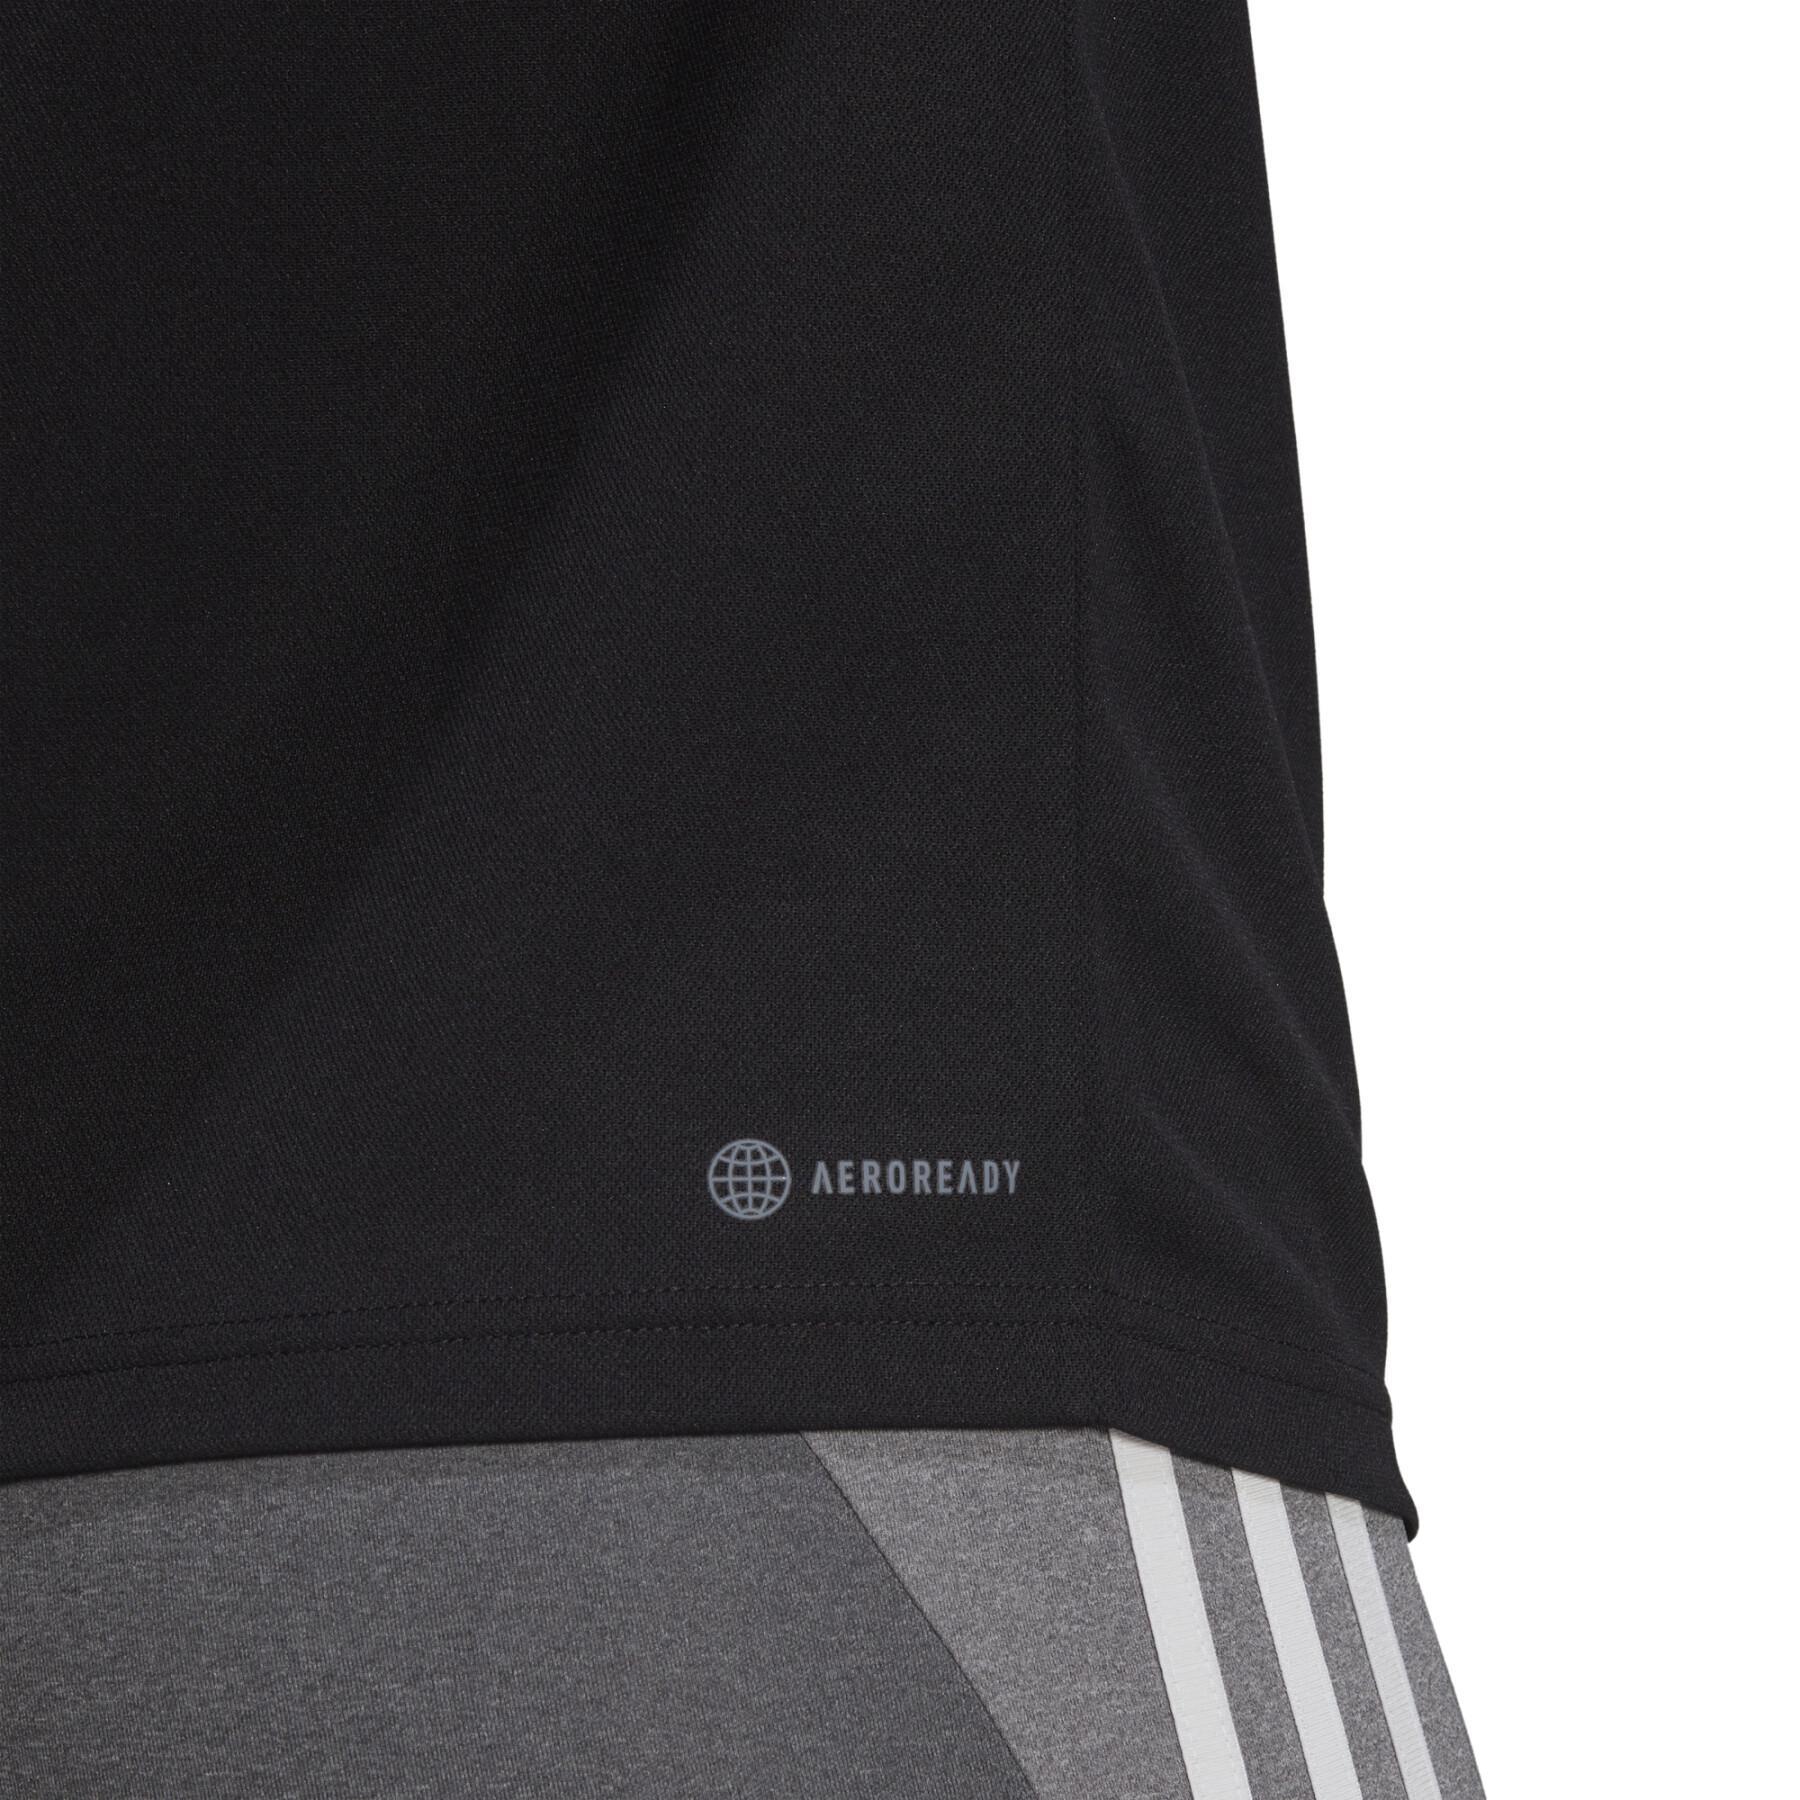 Women's tank top adidas Designed To Move